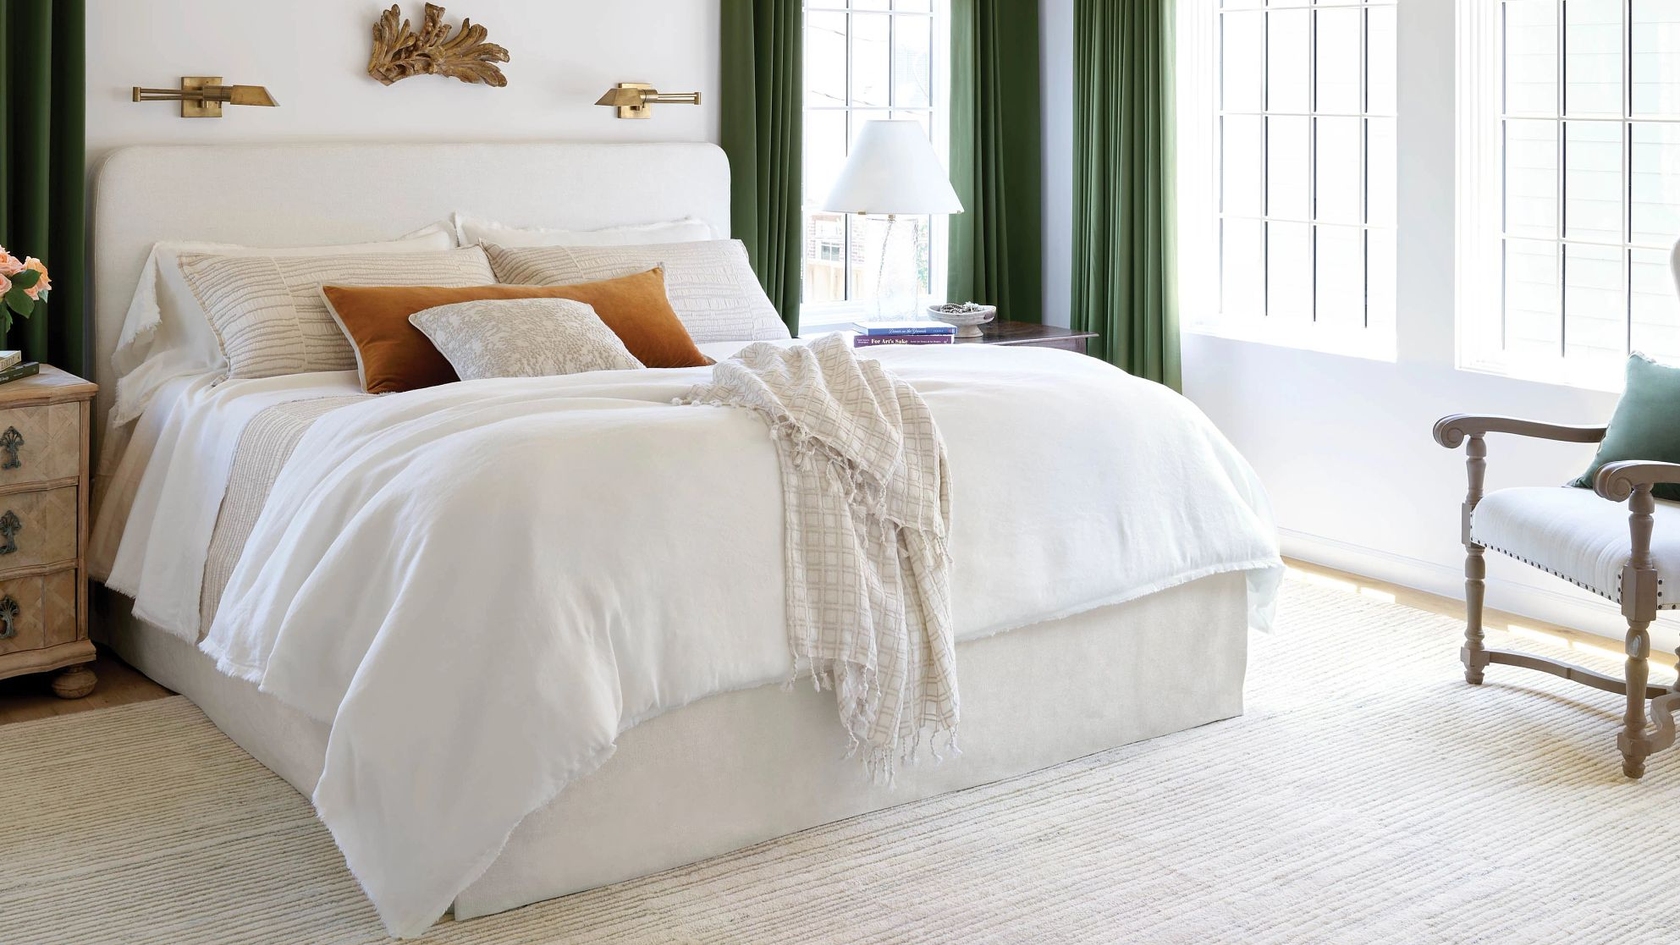 How to Keep Your White Bedding White